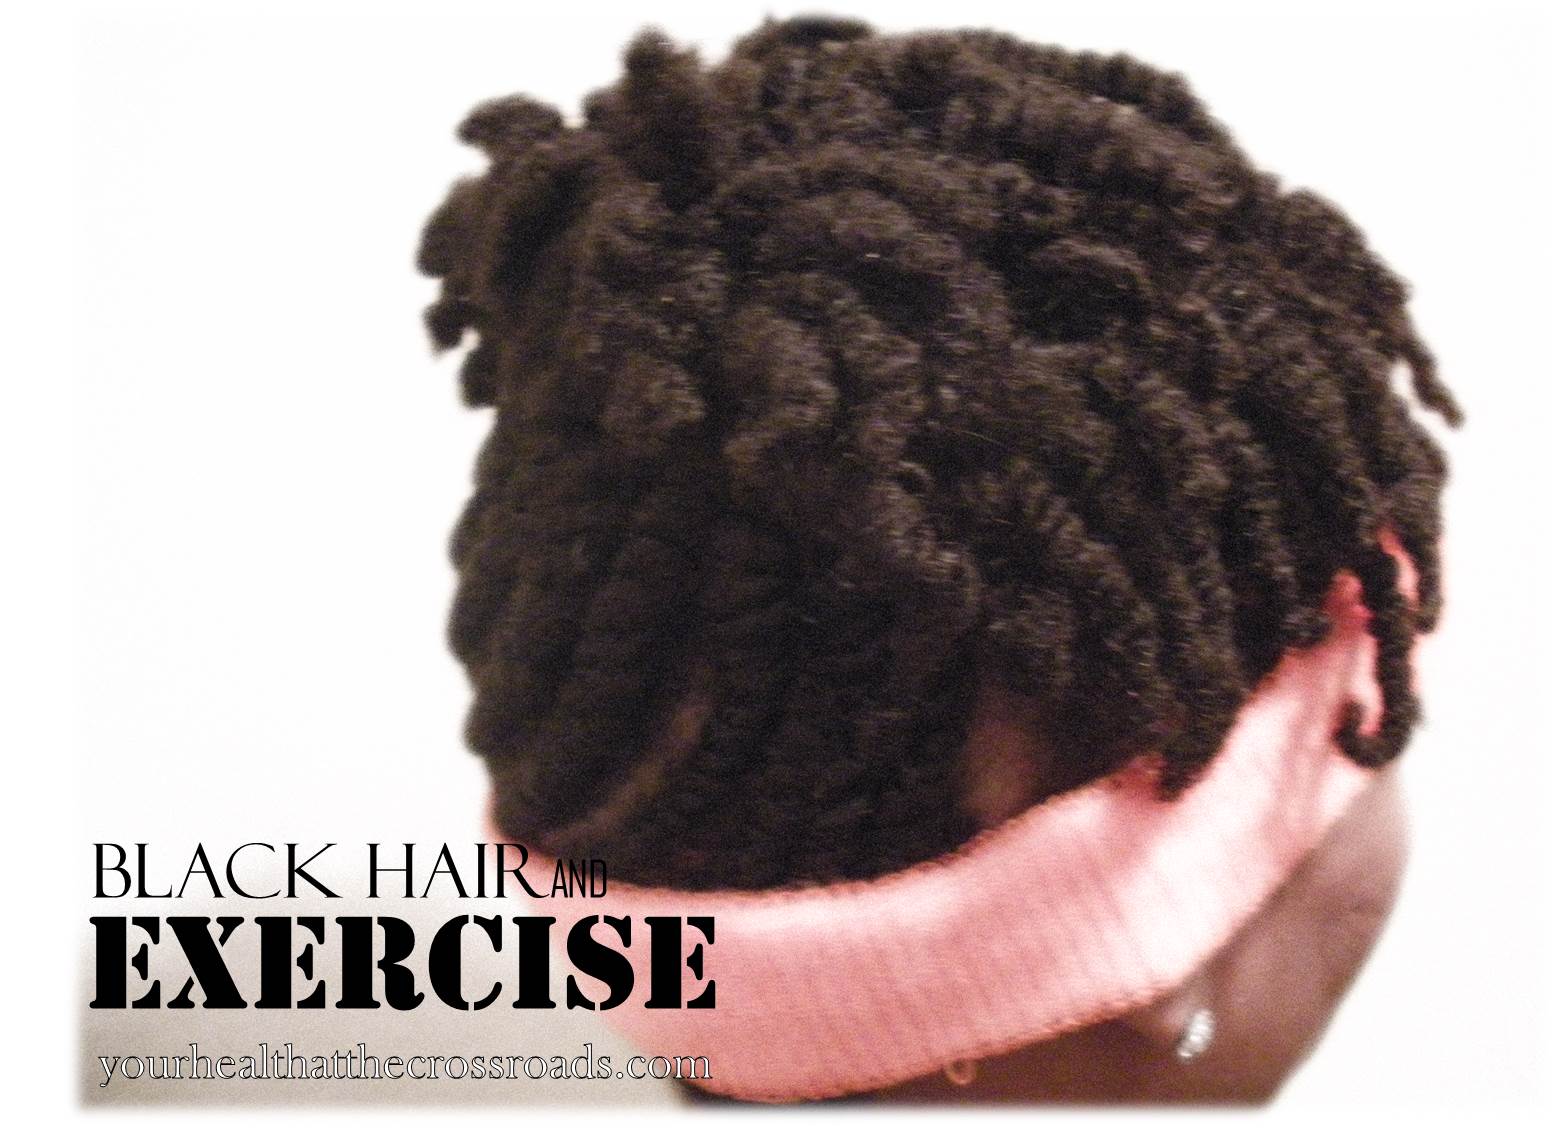 Black Hair and Exercise:  It Can Work